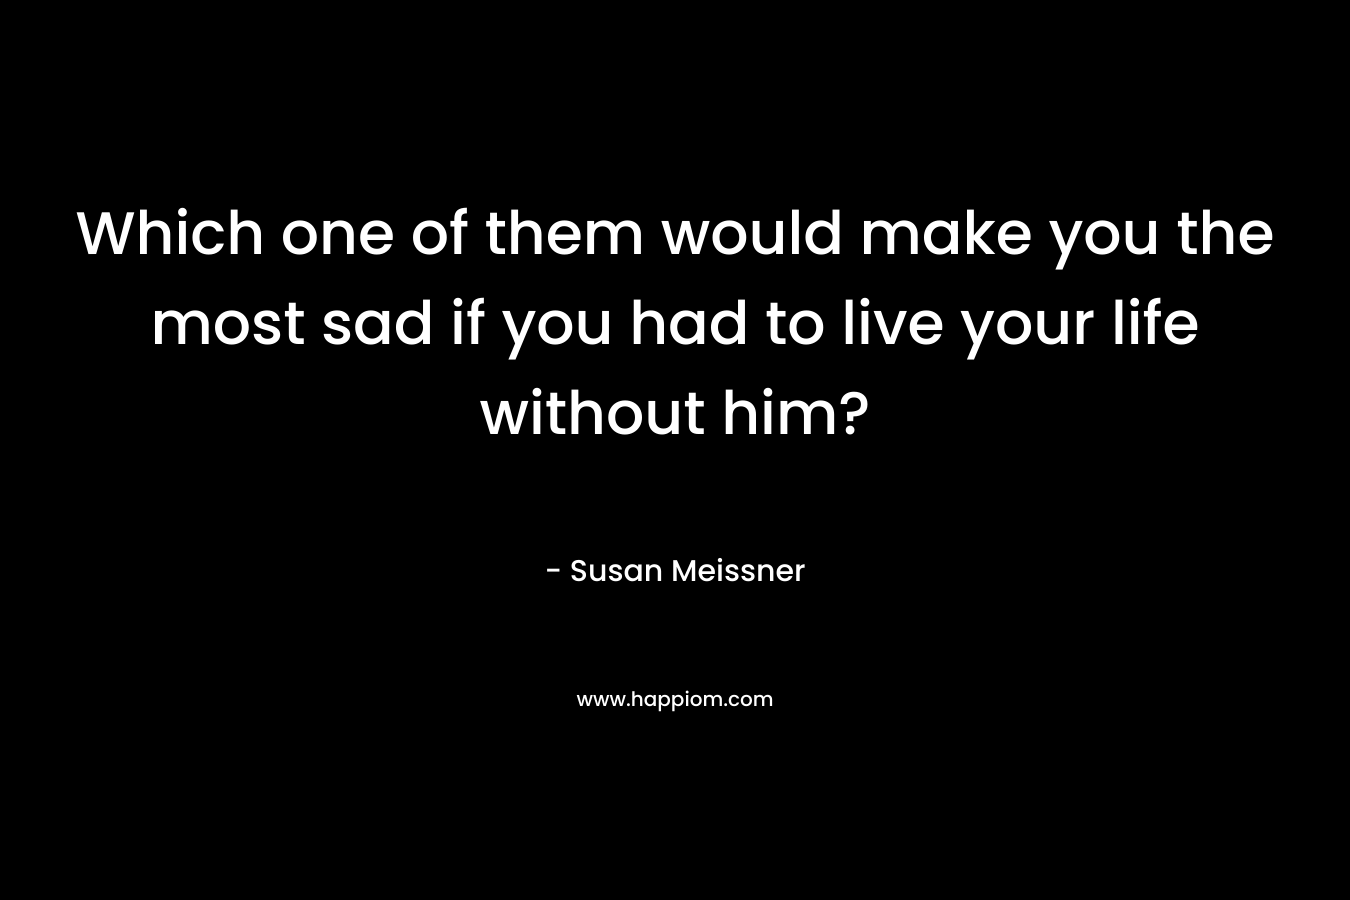 Which one of them would make you the most sad if you had to live your life without him? – Susan Meissner